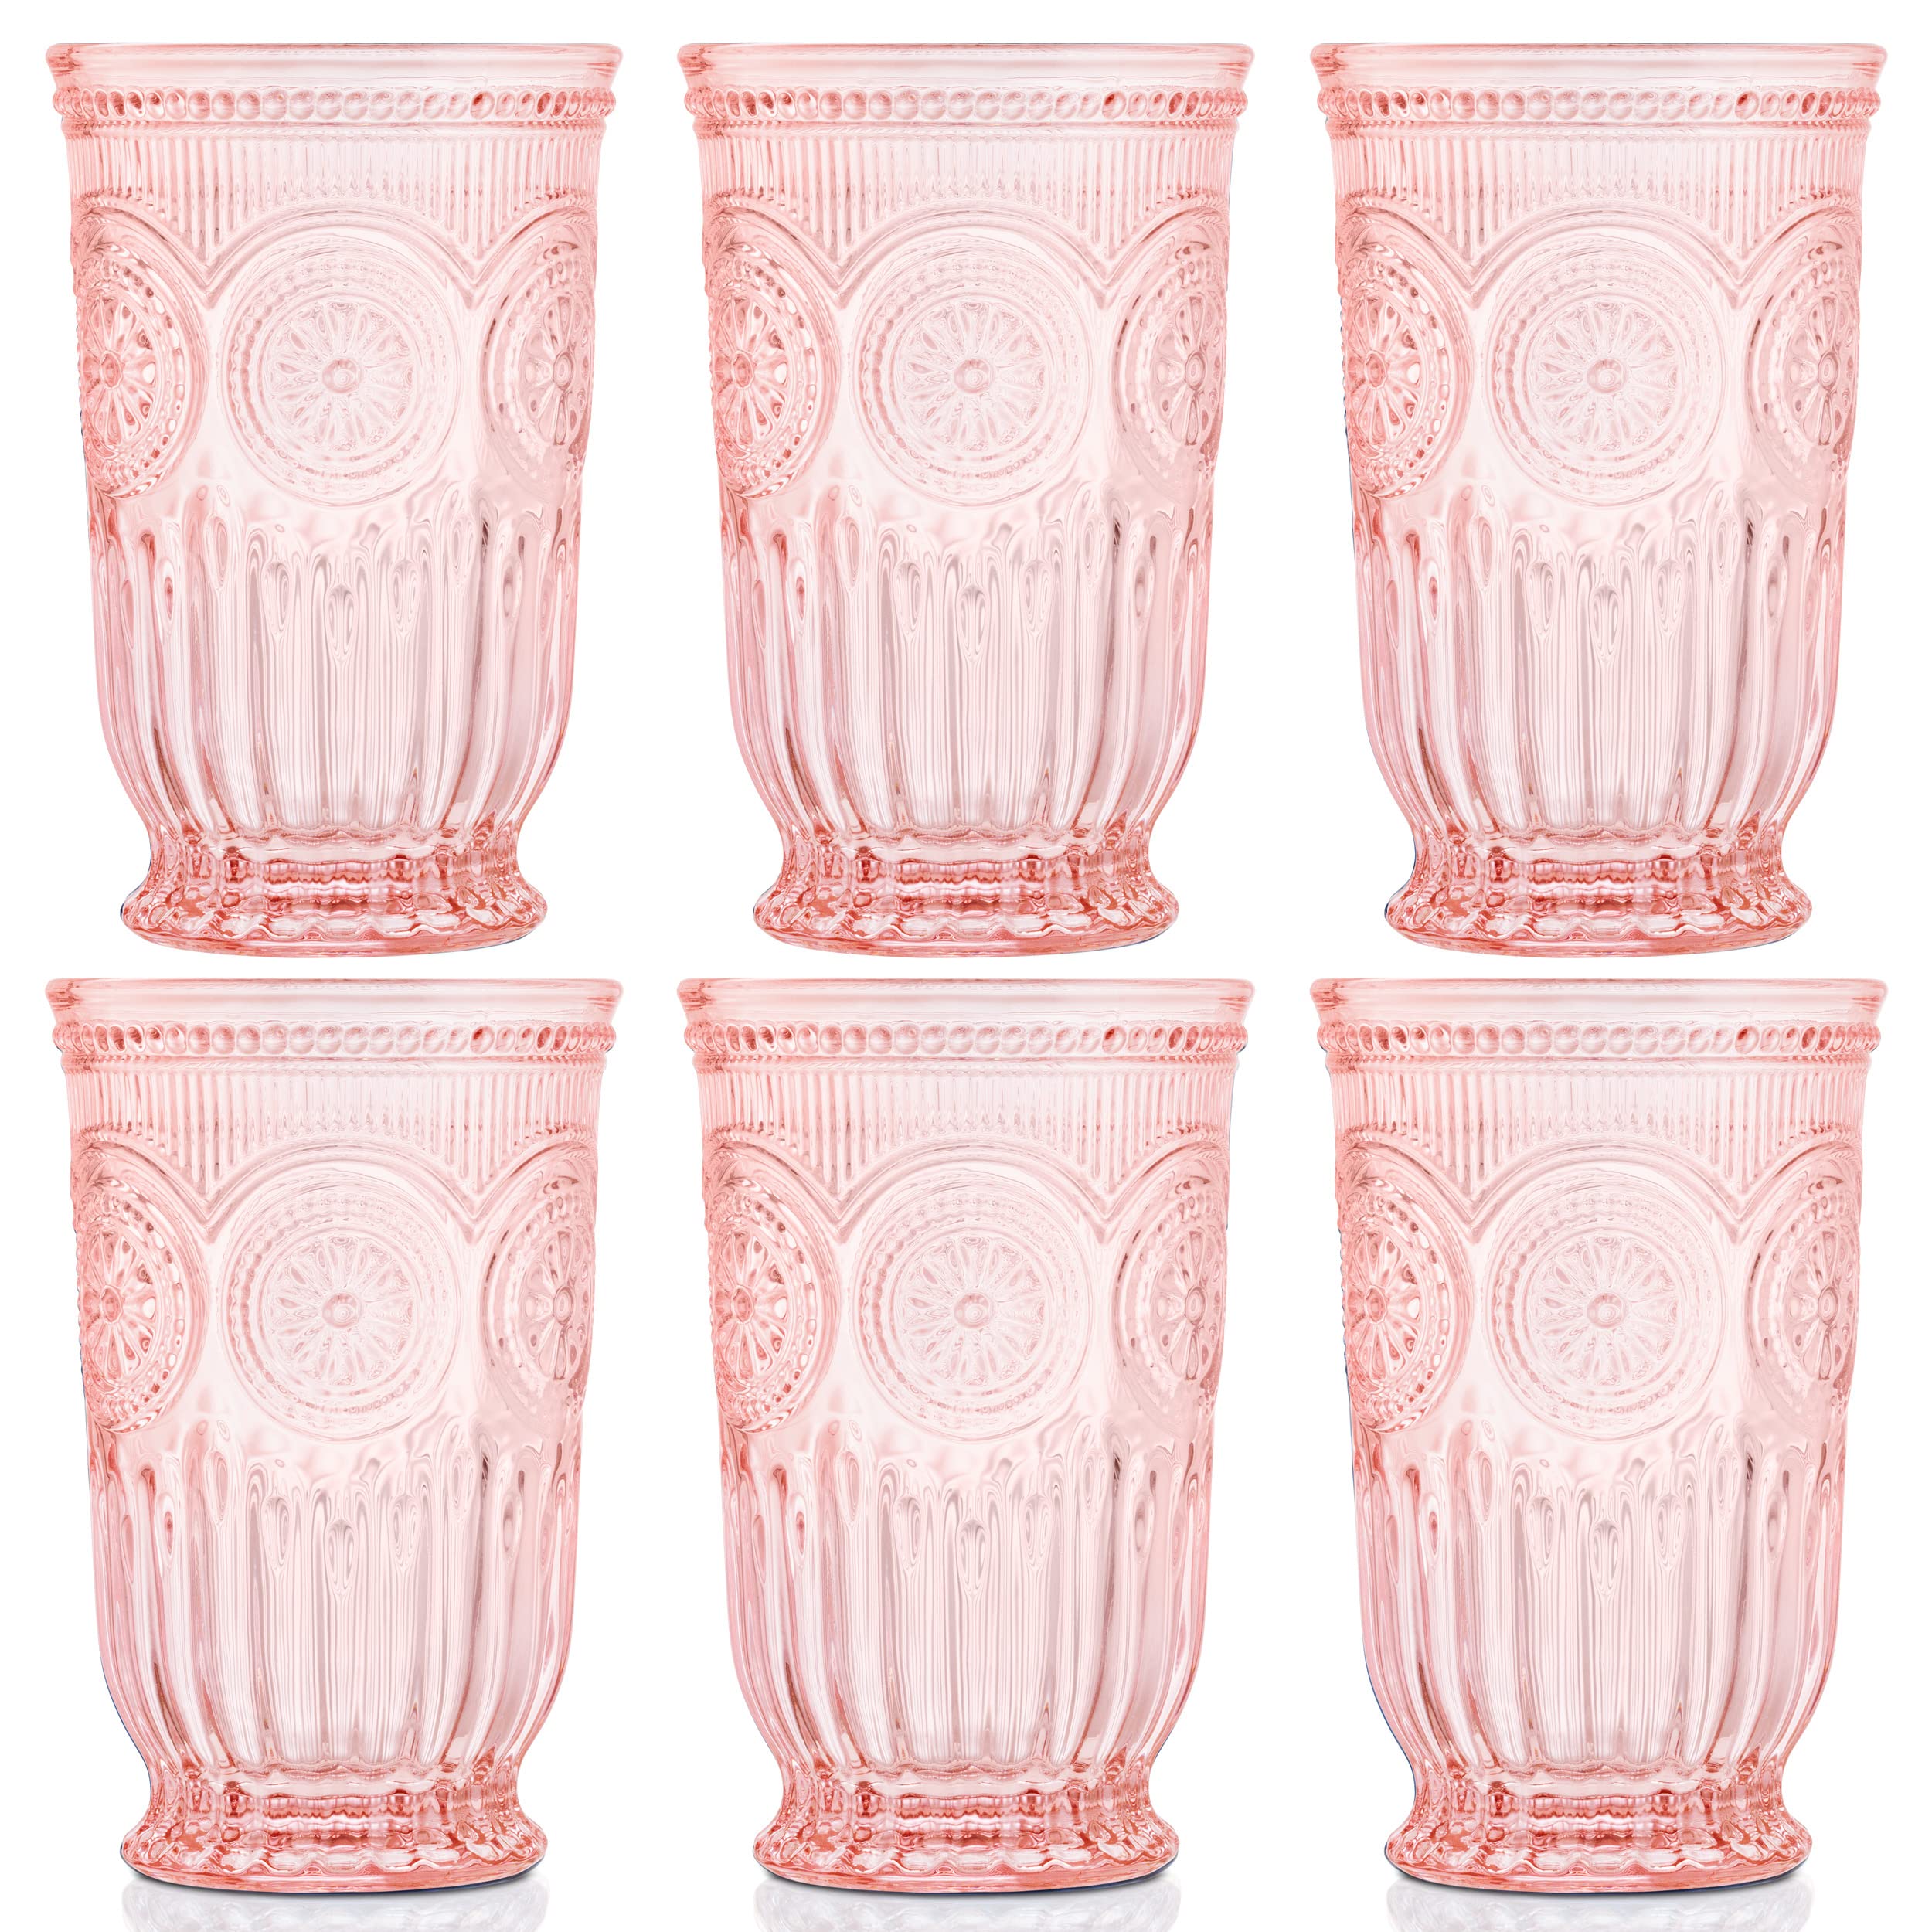 Yungala Pink glassware set of 6 vintage drinking glasses, Dishwasher safe colored glassware with matching pink wine glasses or short pin